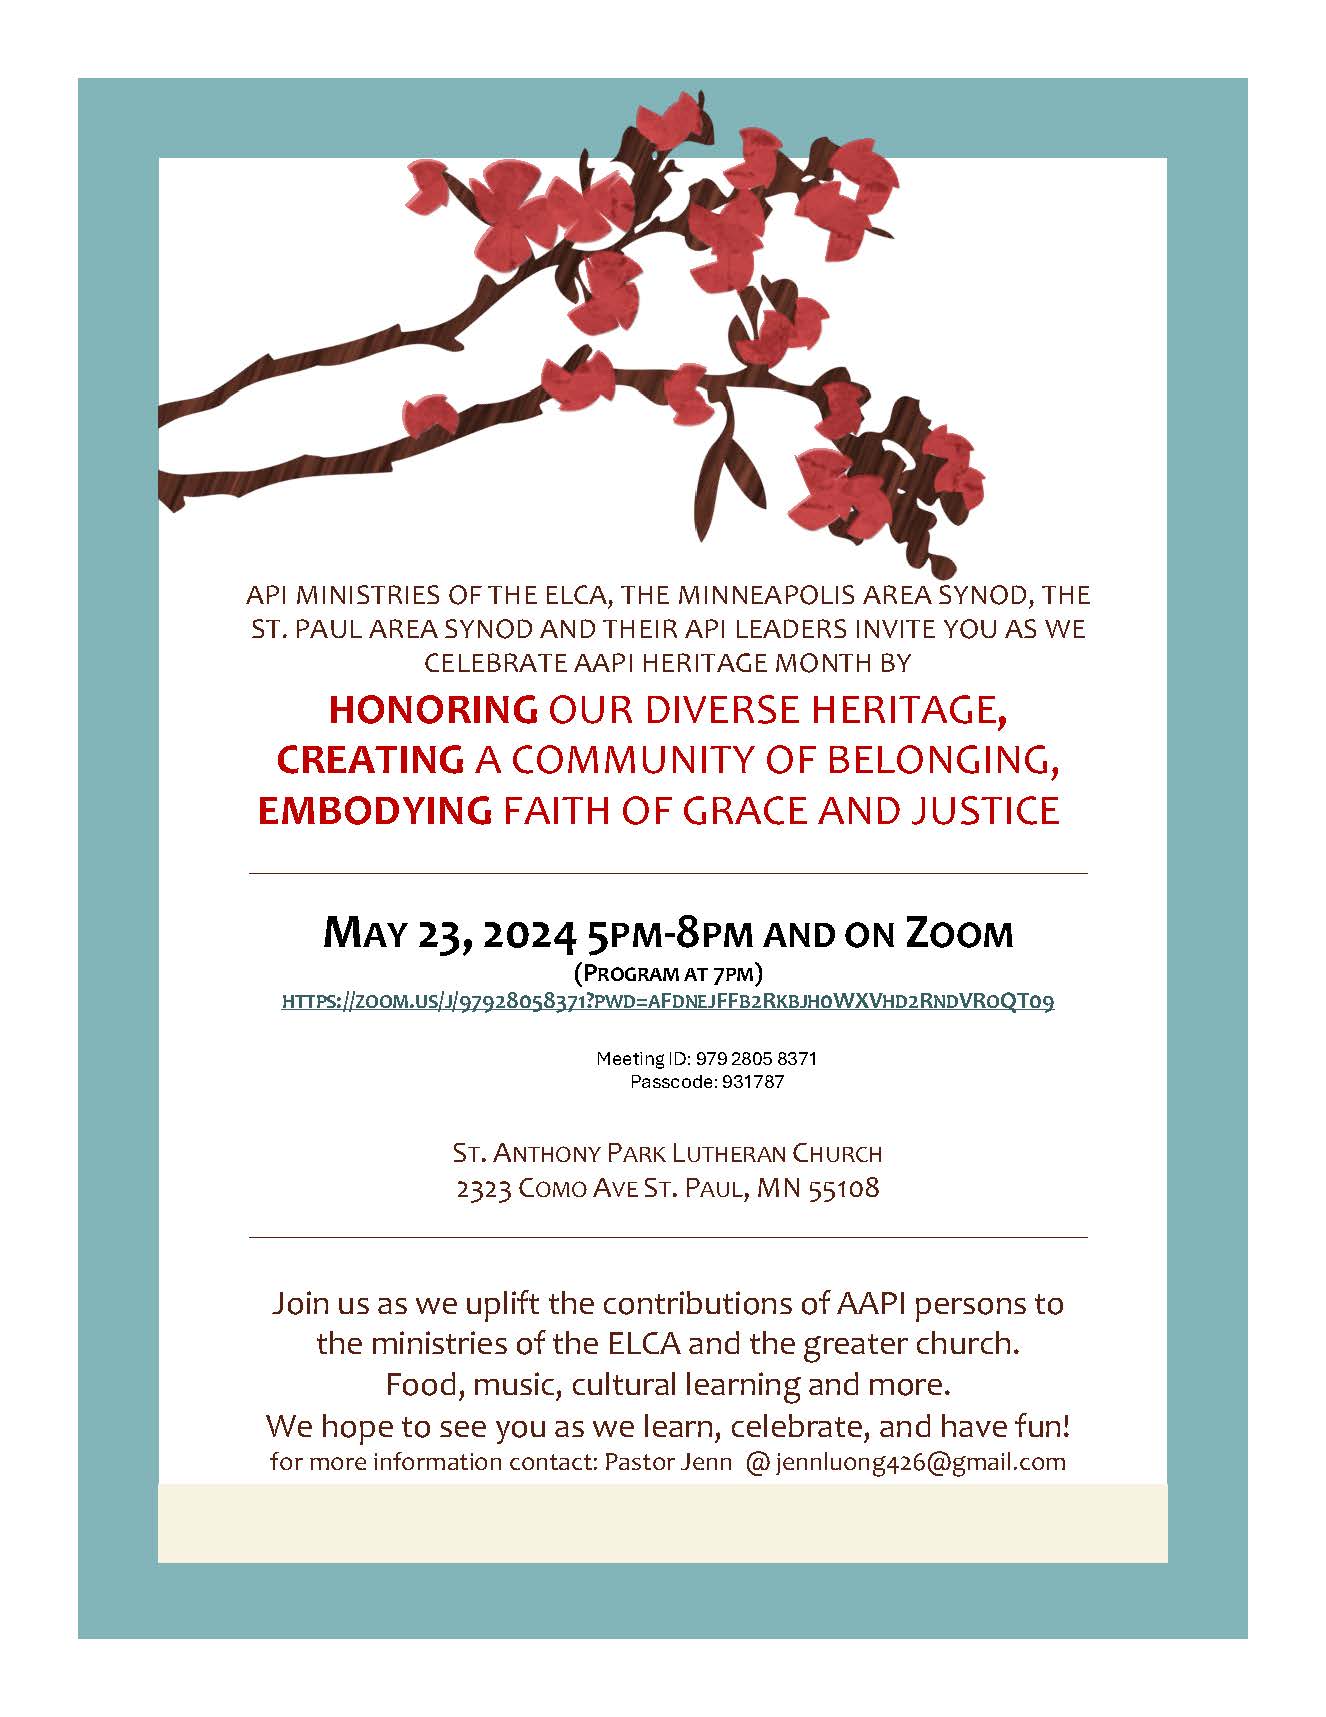 API MINISTRIES OF THE ELCA, THE MINNEAPOLIS AREA SYNOD, THE ST. PAUL AREA SYNOD AND THEIR API LEADERS INVITE YOU AS WE CELEBRATE AAPI HERITAGE MONTH BY
HONORING OUR DIVERSE HERITAGE, CREATING A COMMUNITY OF BELONGING, EMBODYING FAITH OF GRACE AND JUSTICE  
MAY 23, 2024 5PM-8PM AND ON ZOOM
(PROGRAM AT 7PM)
HTTPS://ZOOM.US/J/97928058371?PWD=AFDNEJFFB2RKBJH0WXVHD2RNDVROQT09

Meeting ID: 979 2805 8371
Passcode: 931787

ST. ANTHONY PARK LUTHERAN CHURCH
2323 COMO AVE ST. PAUL, MN 55108
Join us as we uplift the contributions of AAPI persons to the ministries of the ELCA and the greater church.
Food, music, cultural learning and more.
We hope to see you as we learn, celebrate, and have fun!
for more information contact: Pastor Jenn  @ jennluong426@gmail.com
